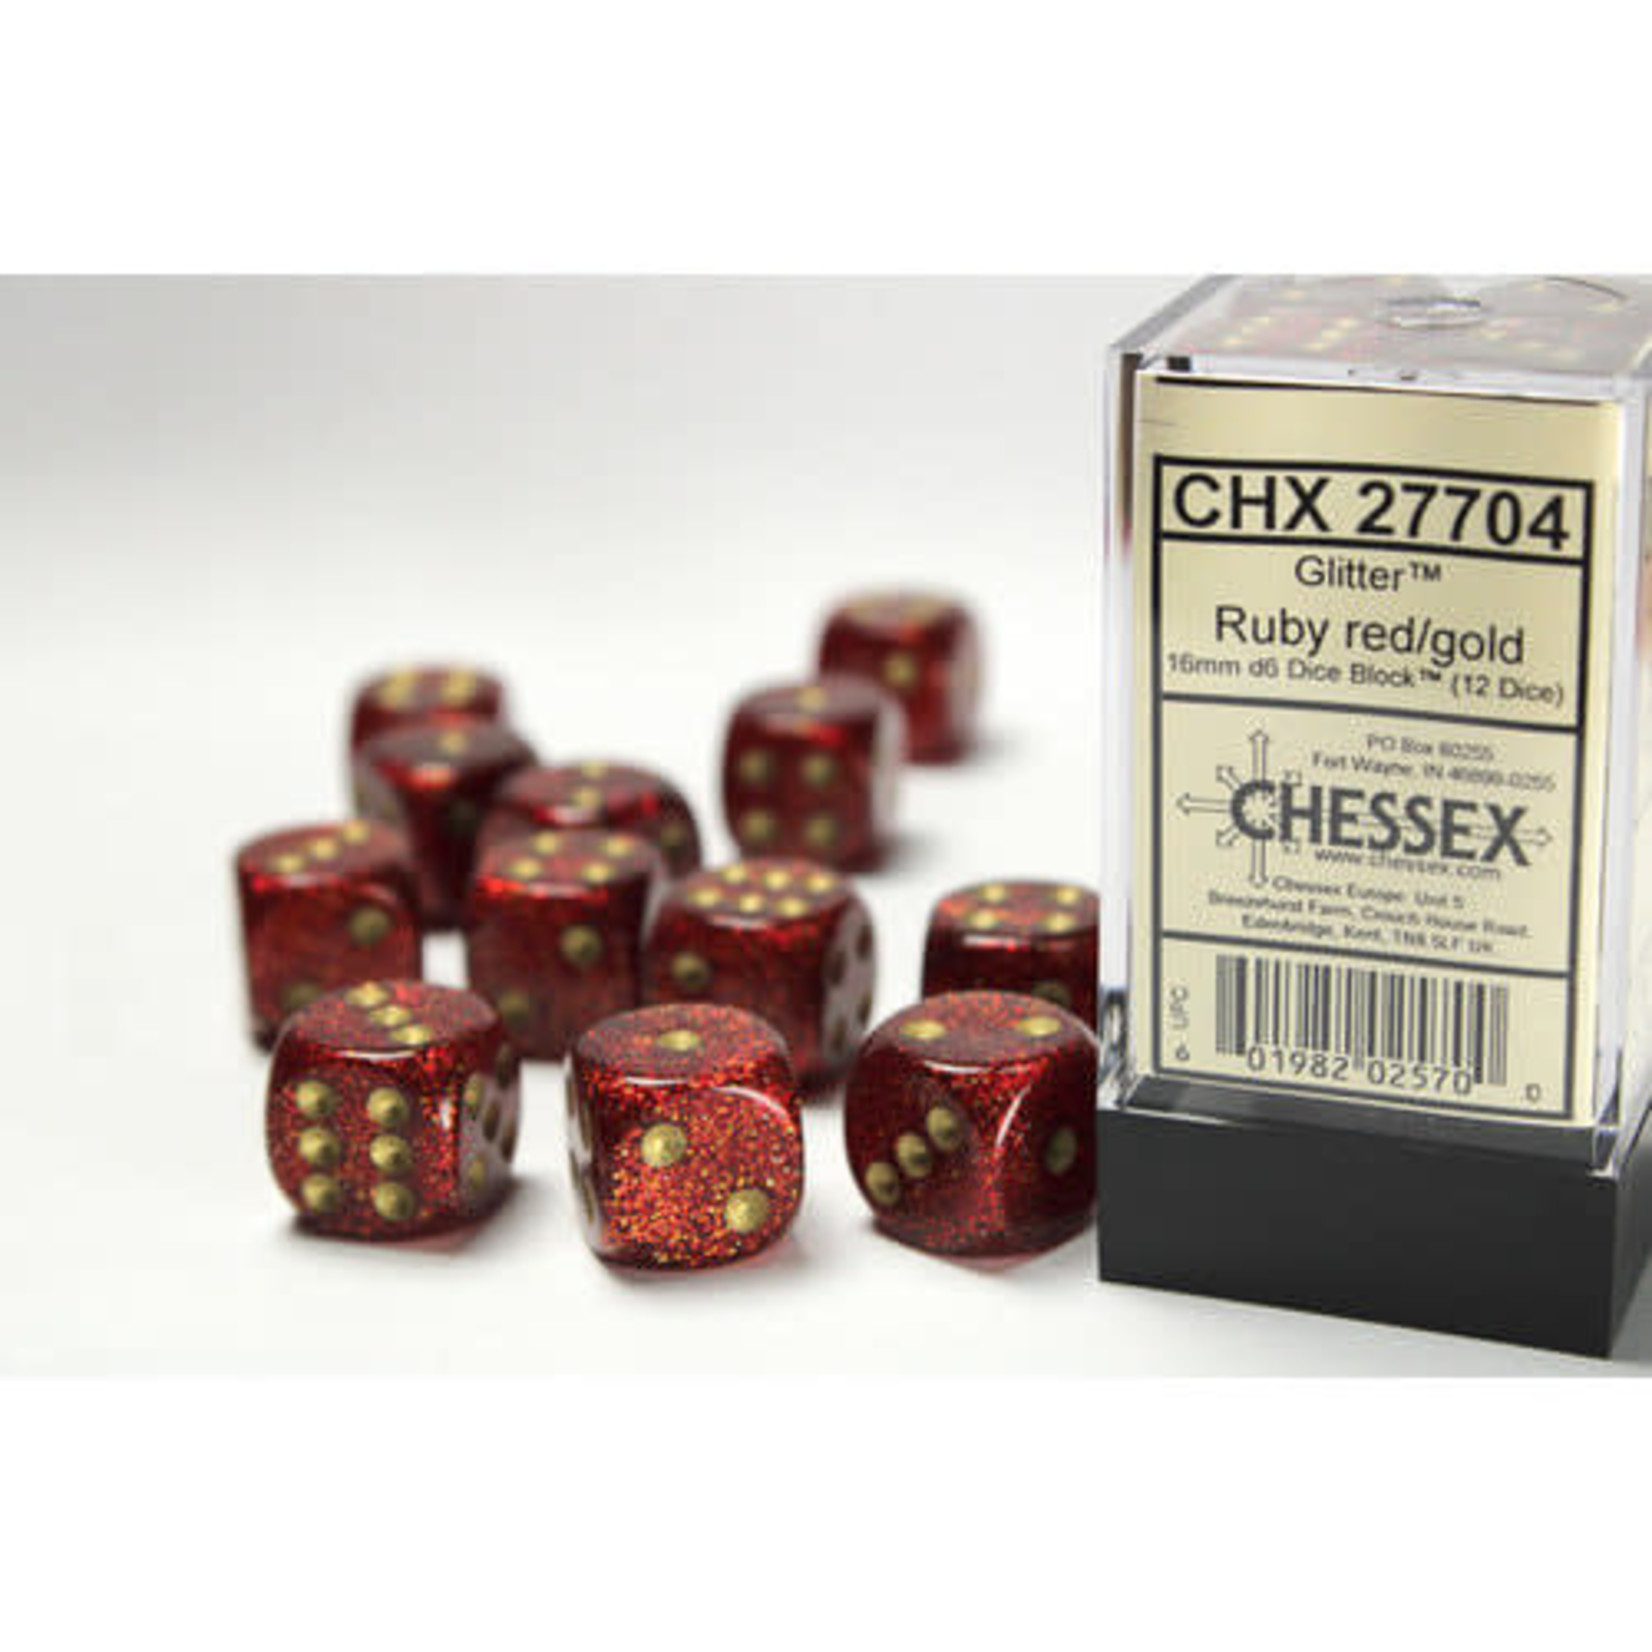 Chessex Chessex Glitter Ruby with Gold 16 mm d6 12 die set